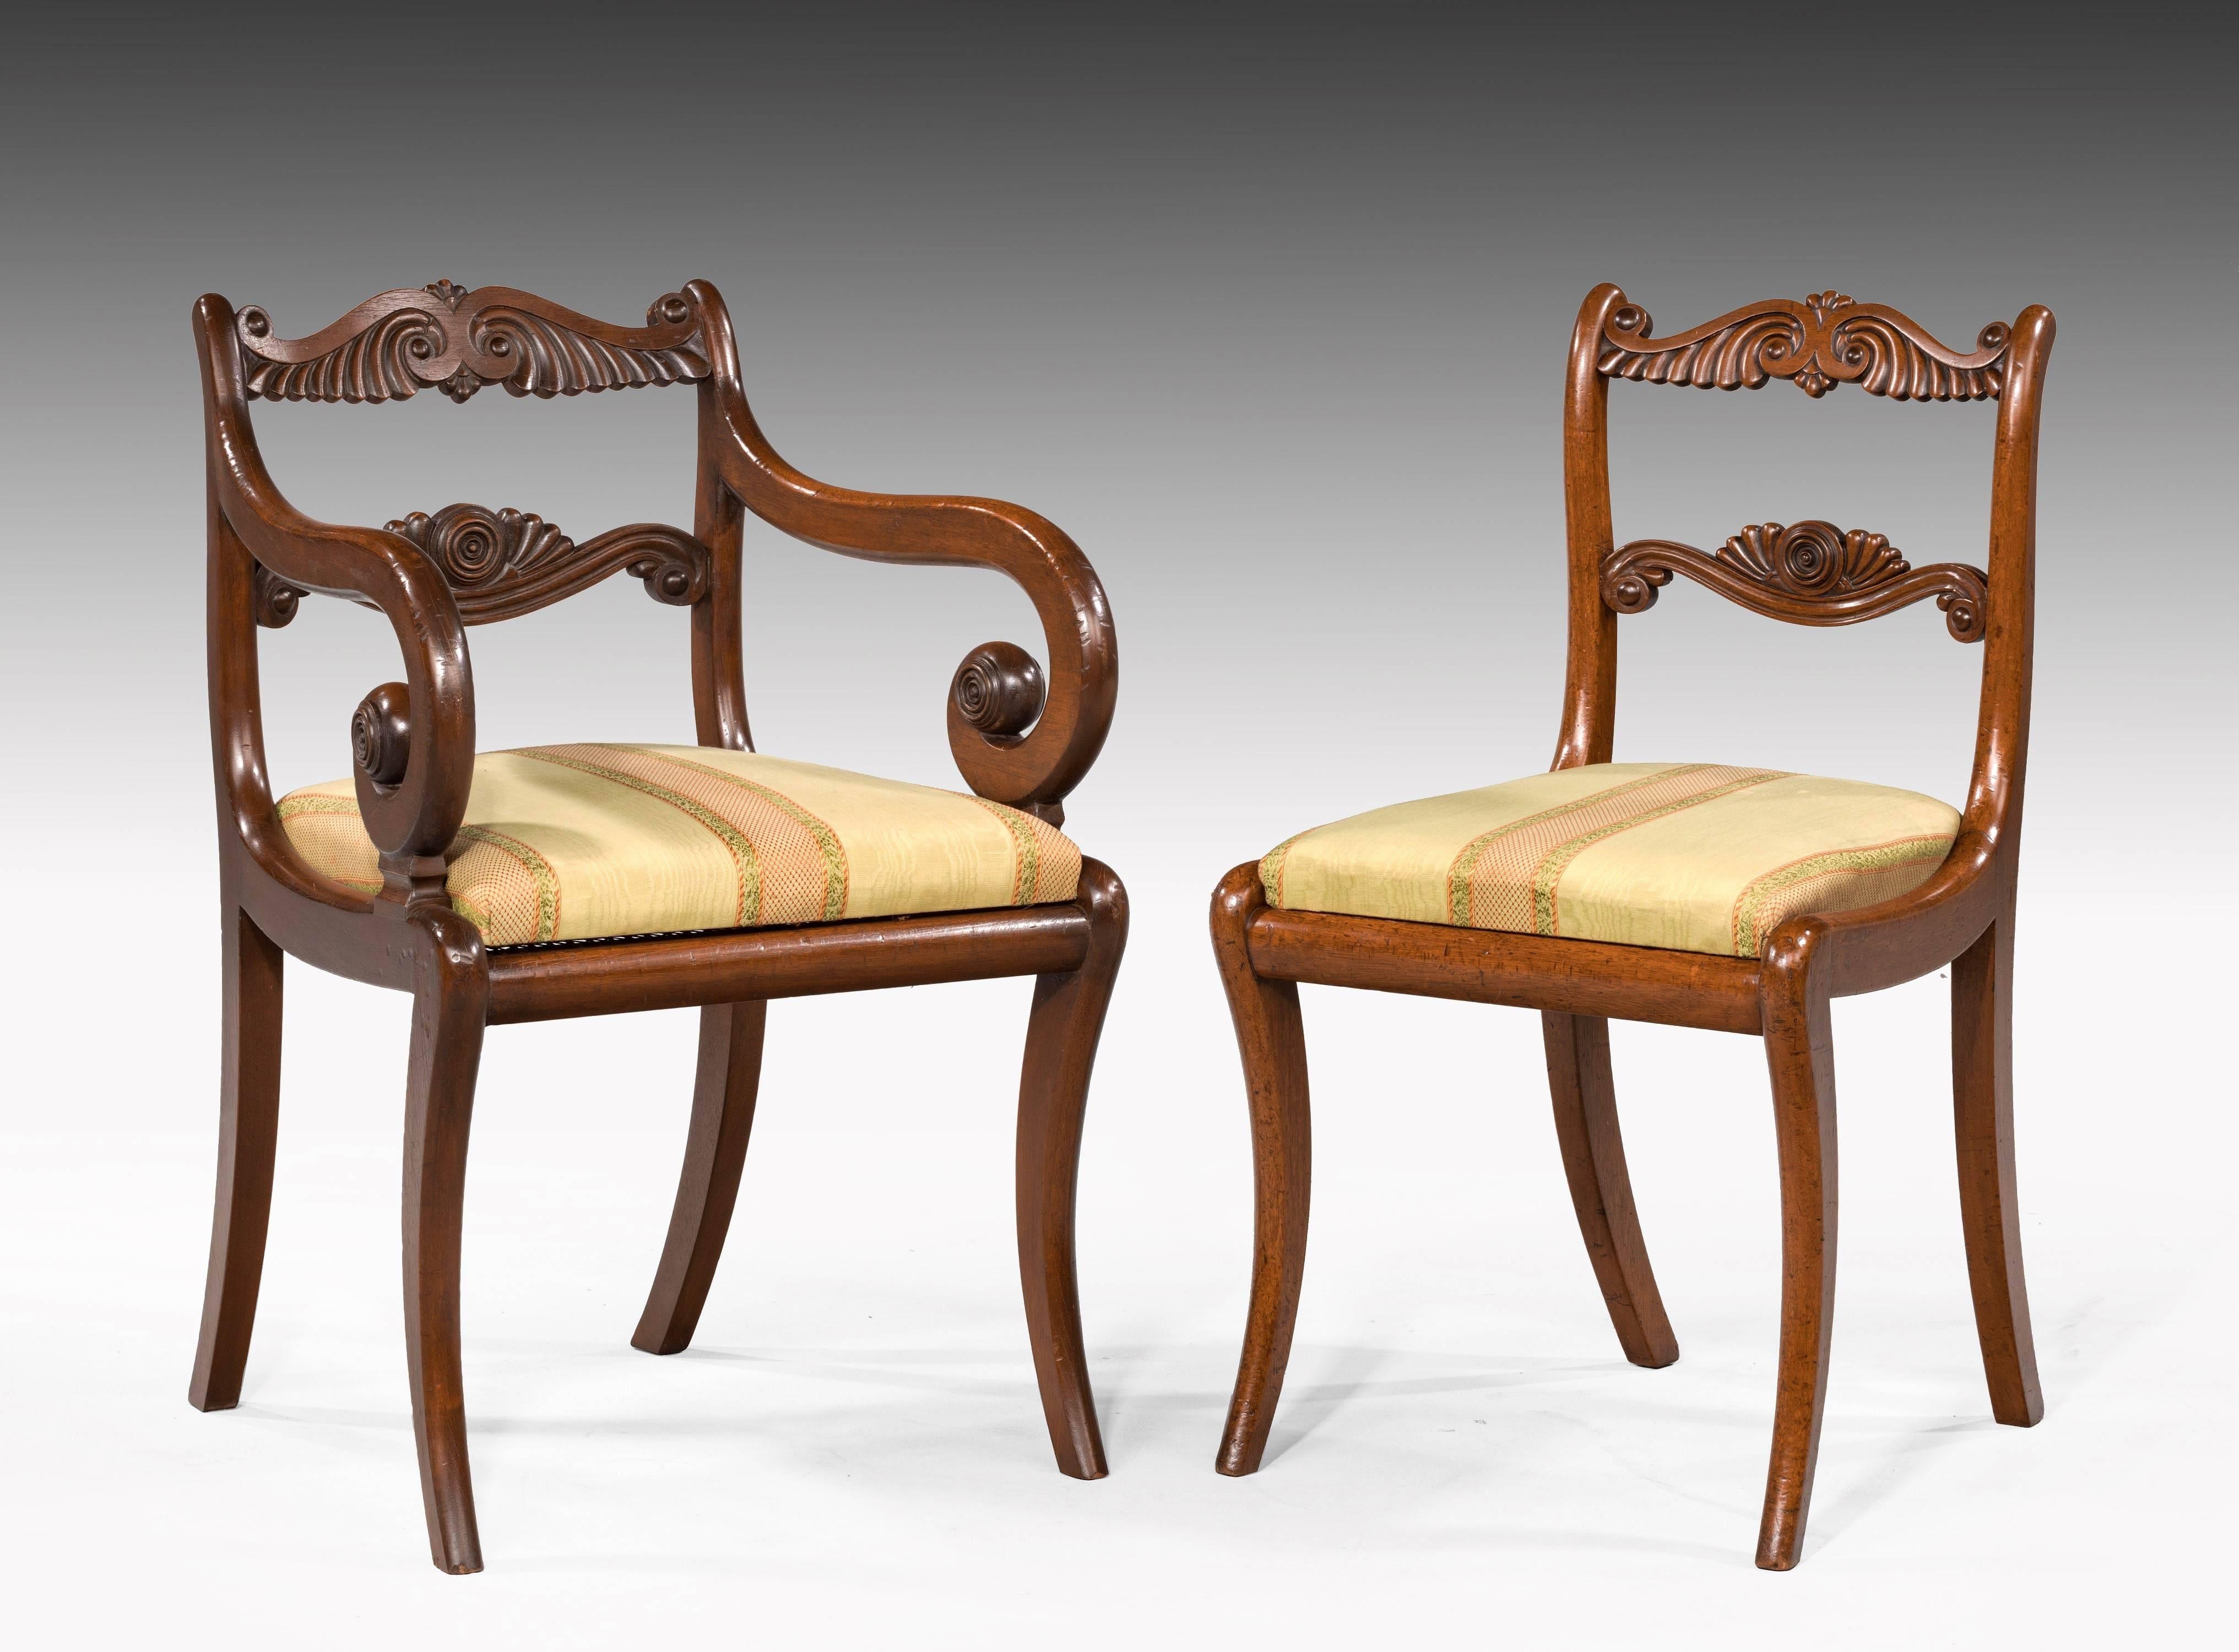 An elegant set of 12 (ten plus two) Regency period mahogany dining chairs in quite extraordinary good original condition, including the cane seats and polish. Sabre legs. The top and centre horizontal splats beautifully carved with fronds.

The